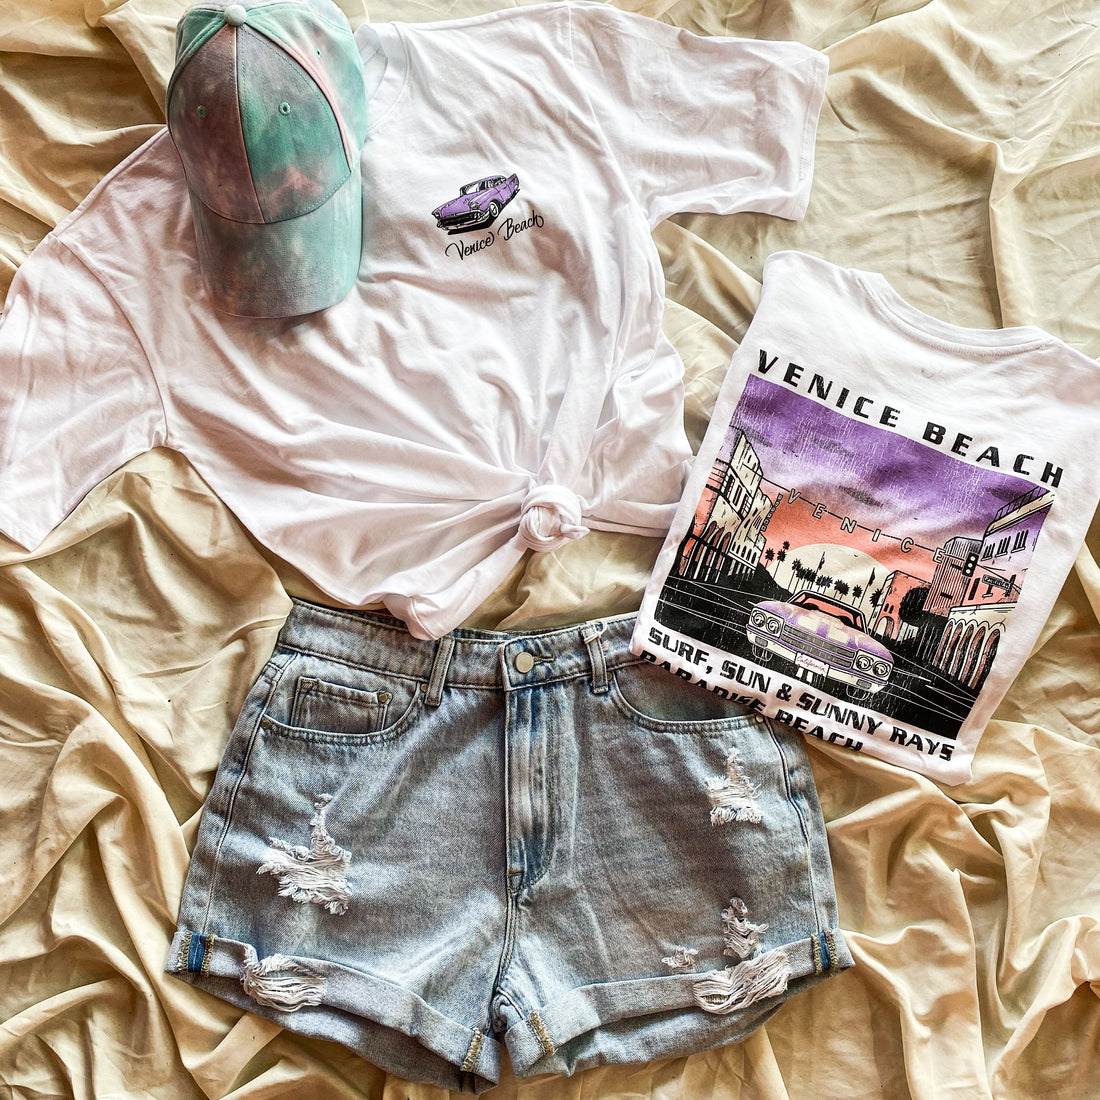 Outfit of the Week: Wearing Cuttoff Shorts and a Graphic Tee on Into the Cooler Months